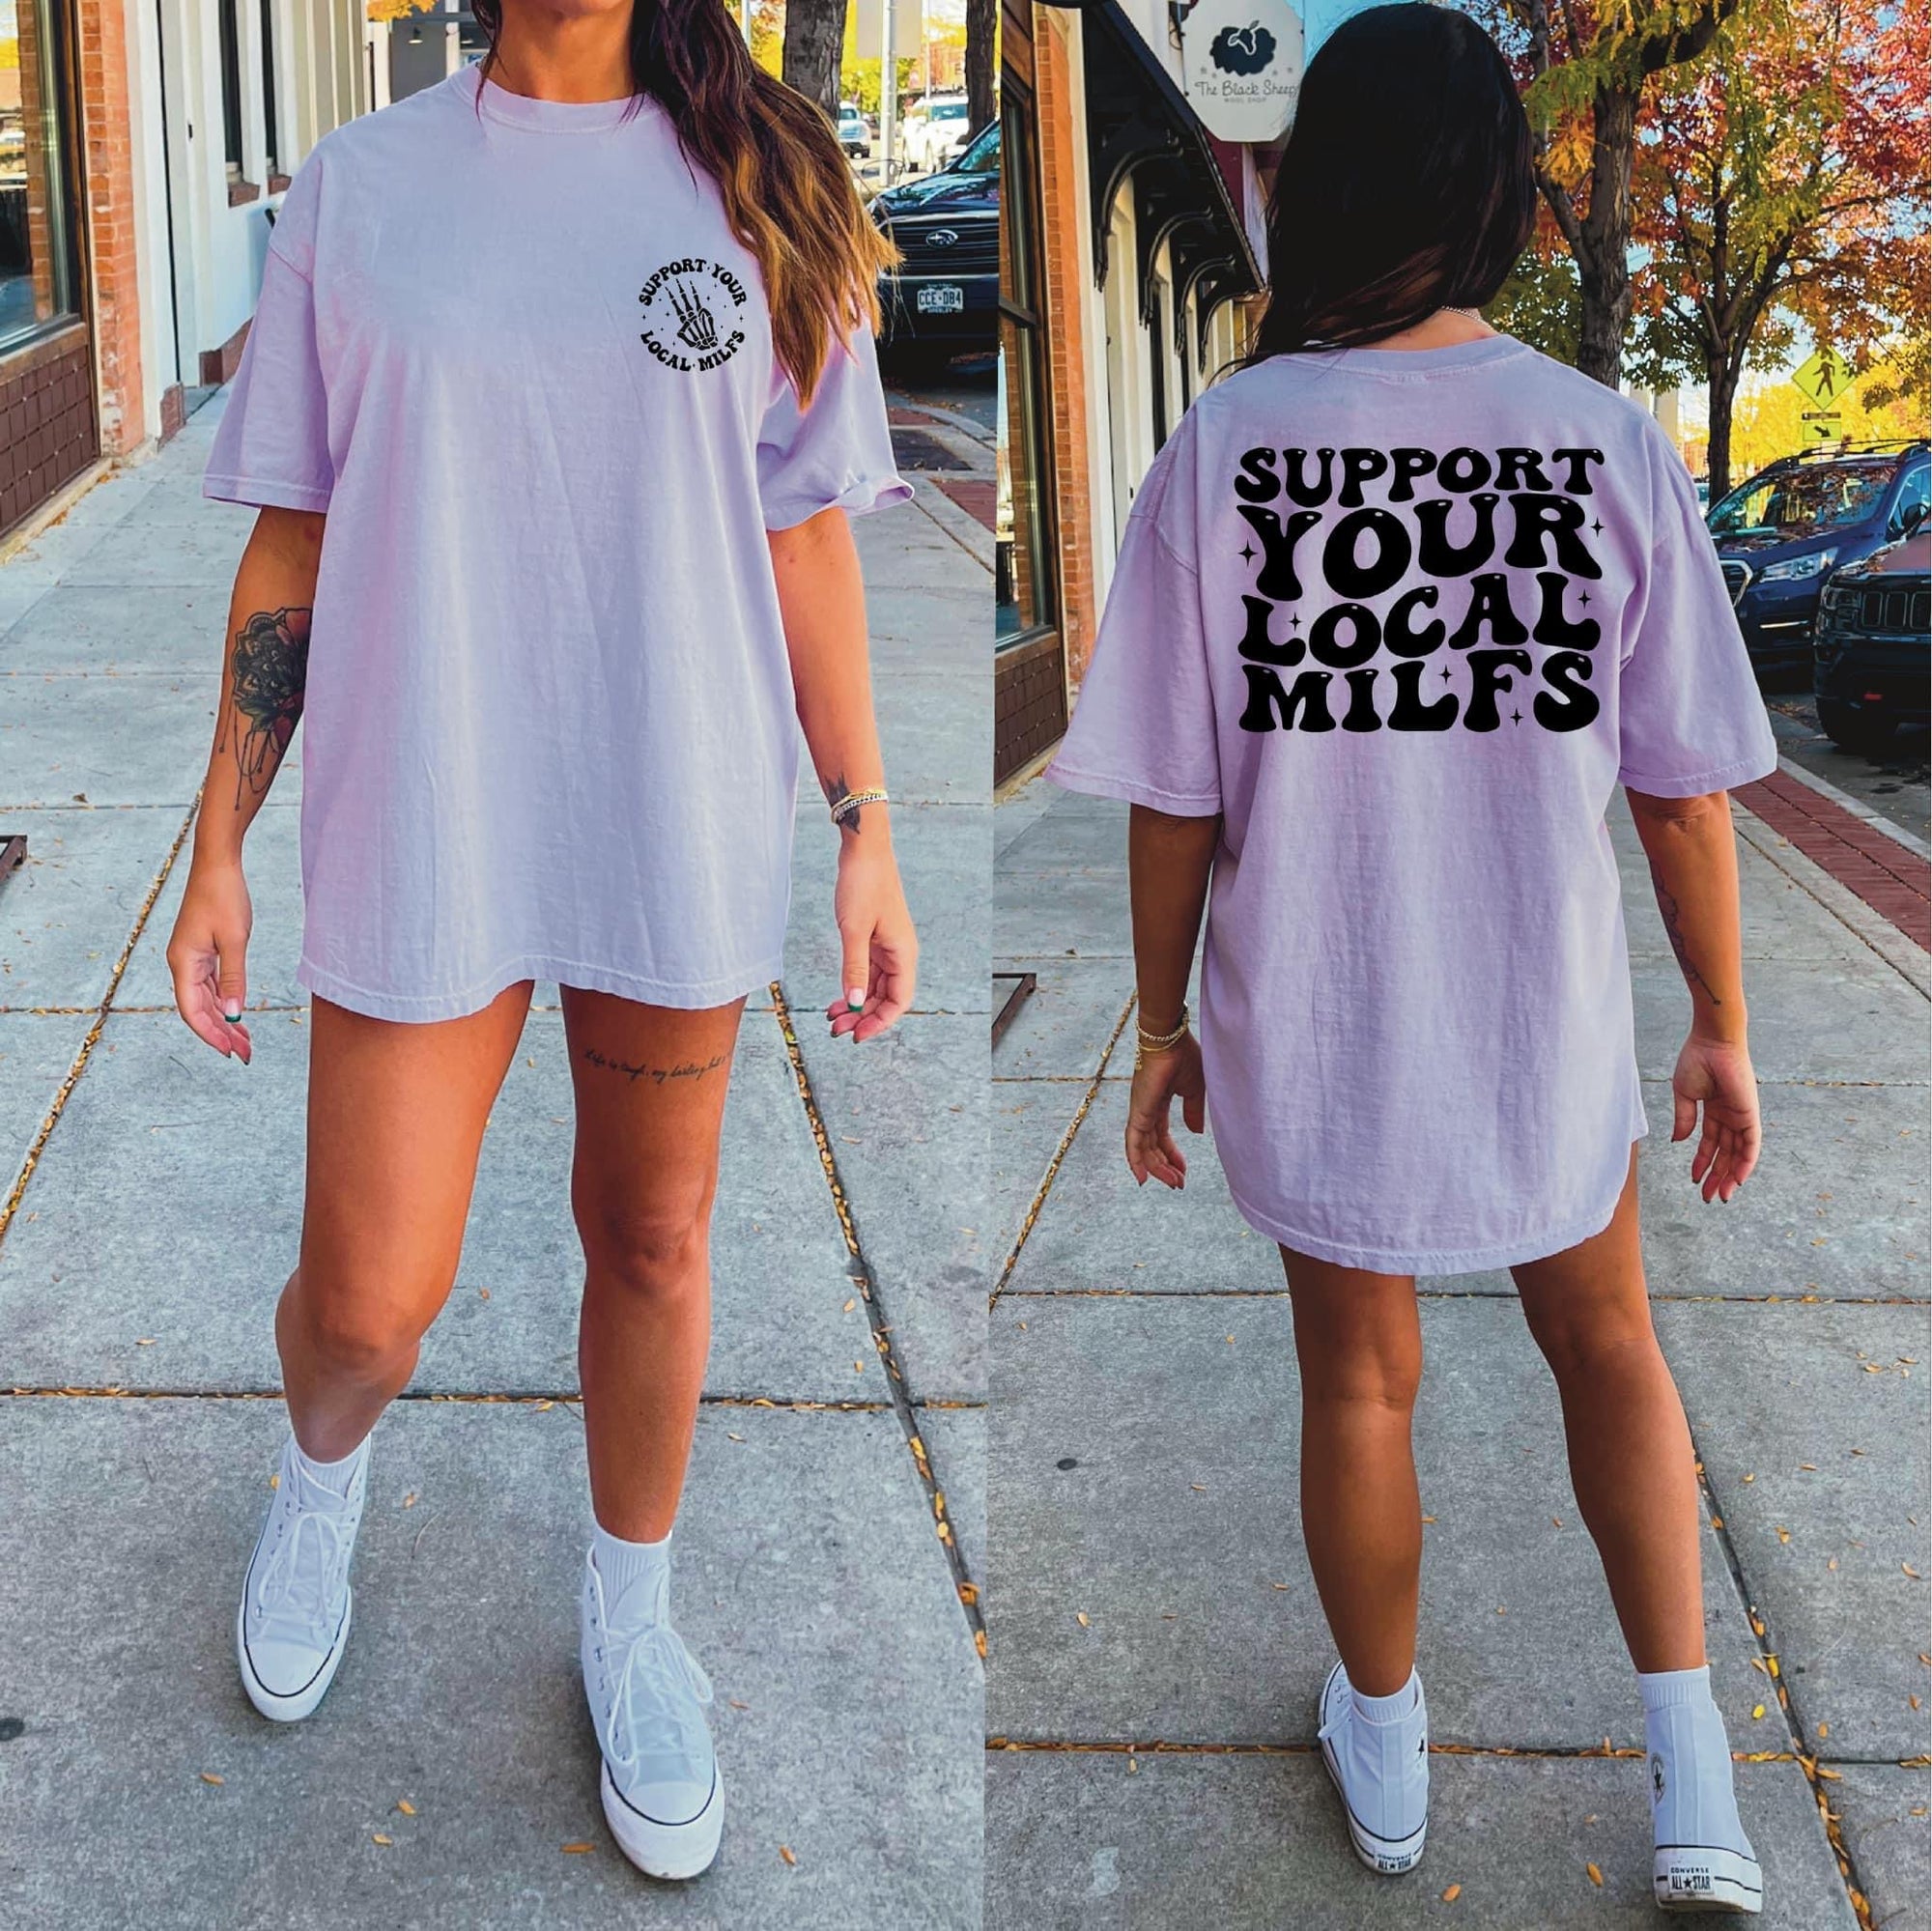 Support local Milfs   -W/POCKET ACCENT GRAPHIC TEE